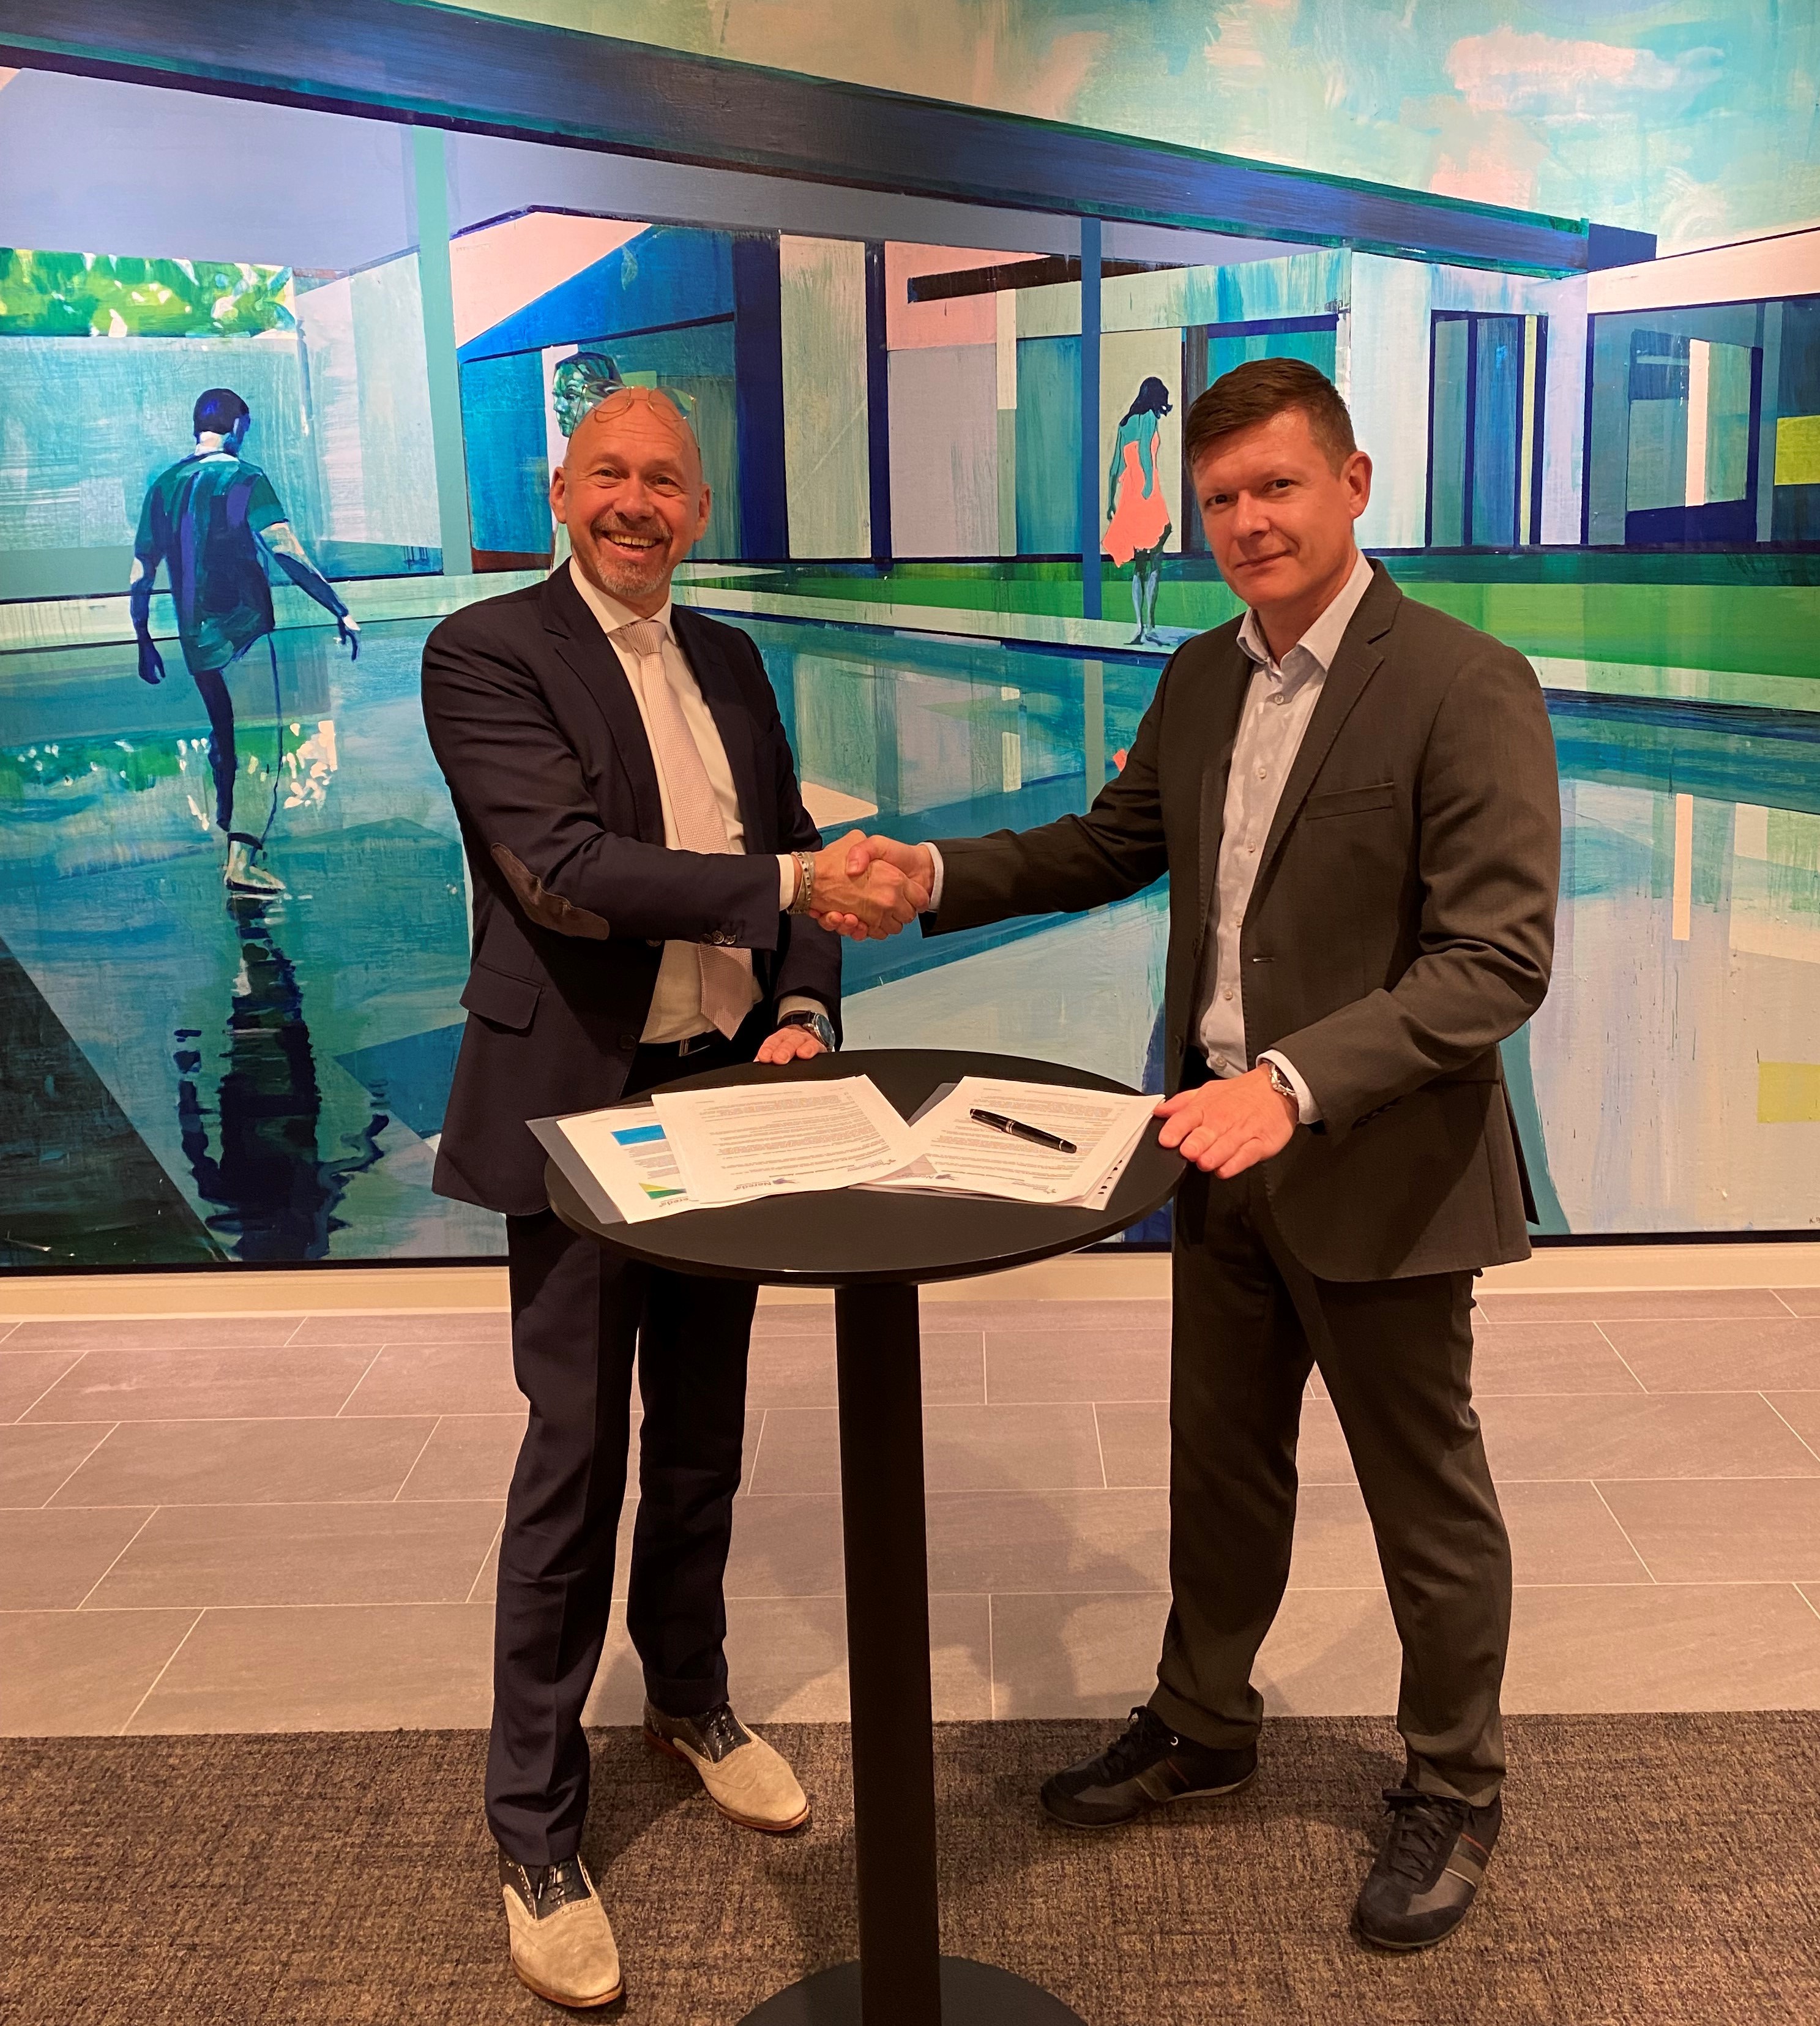 René Noppeney, Global Director of Water Technology Products, Royal HaskoningDHV and Thomas Morrison, Senior Regional Sales Director, Water utility - Western Europe, Grundfos.